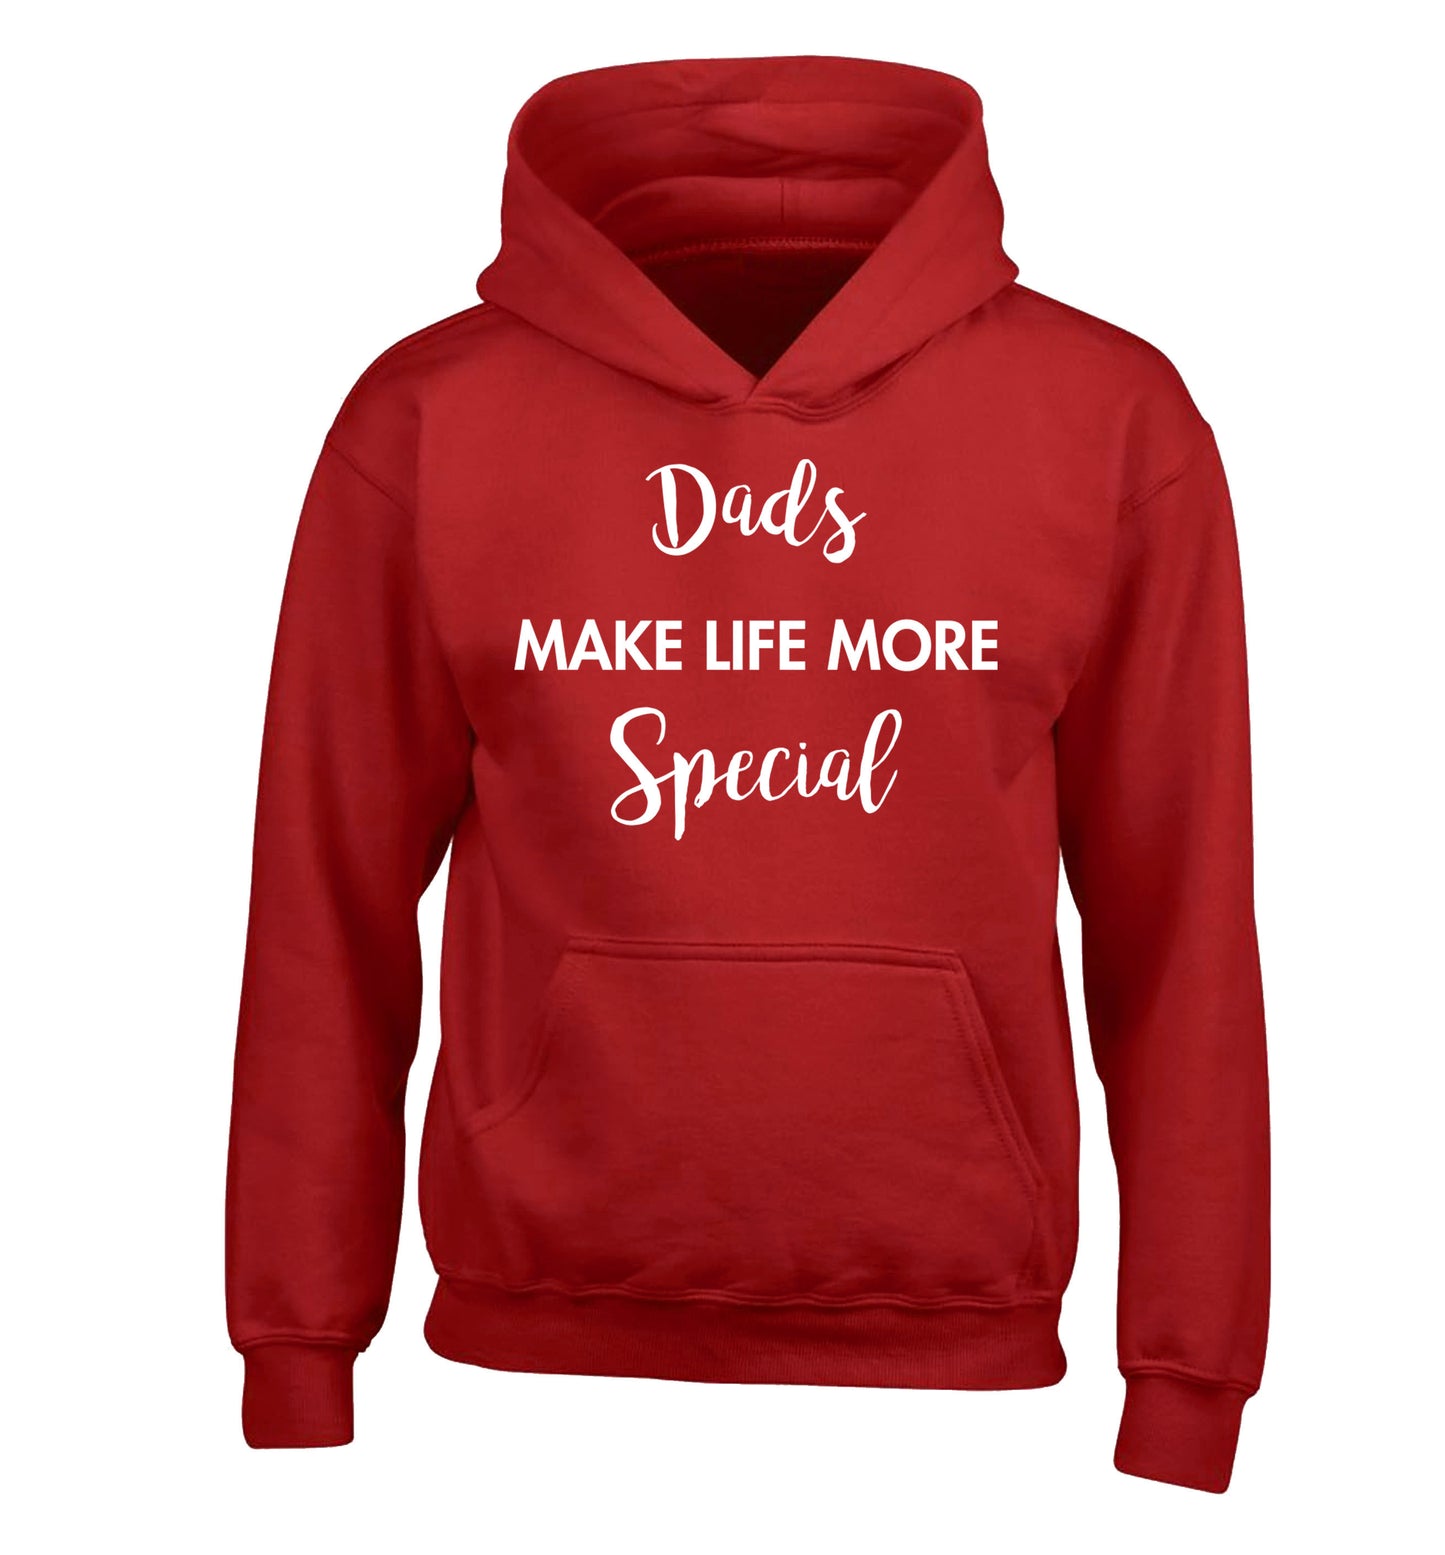 Dads make life more special children's red hoodie 12-14 Years